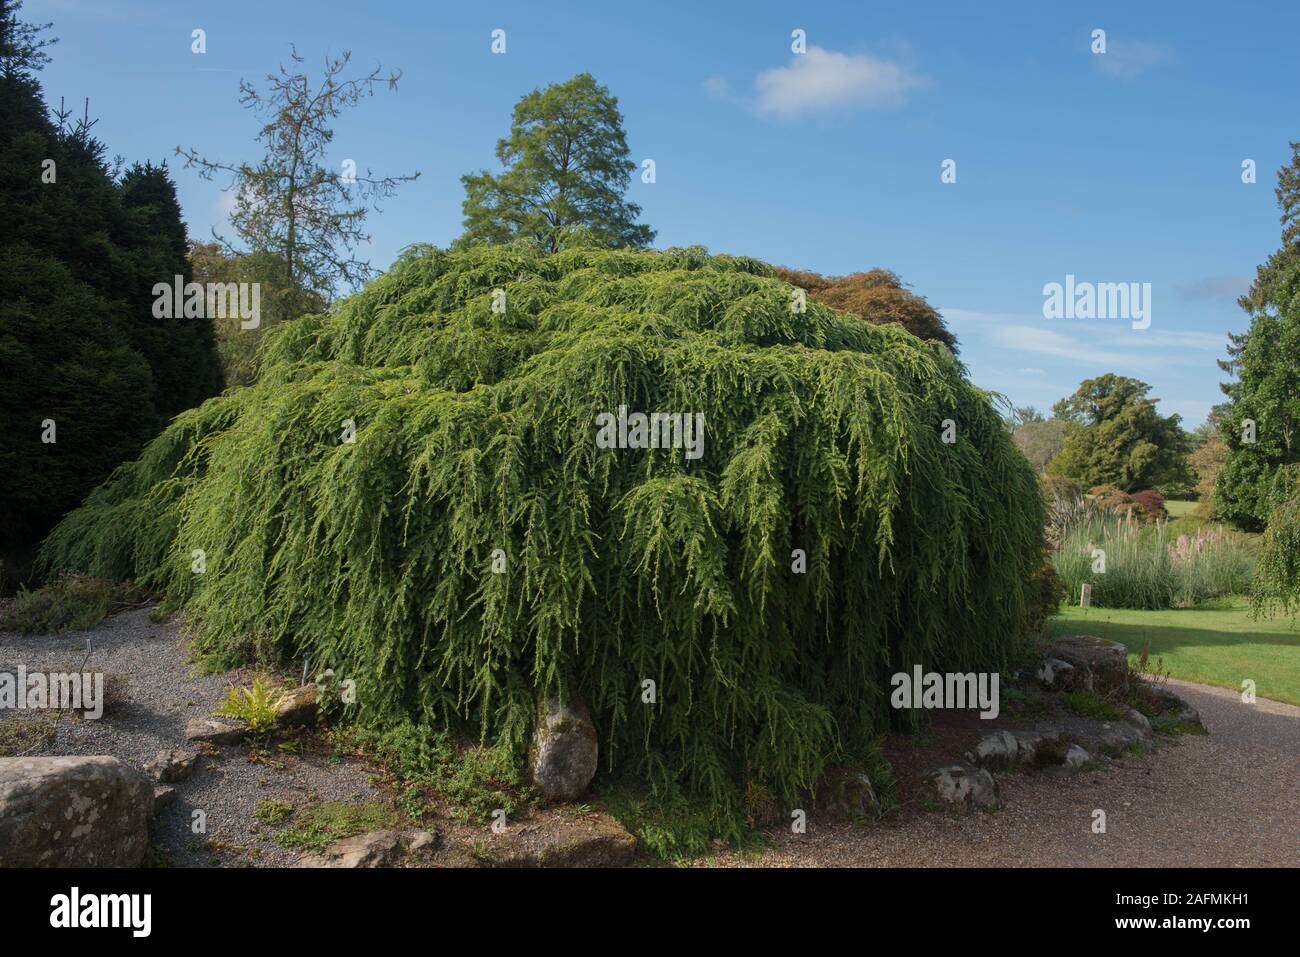 Summer Foliage of a Weeping Eastern Hemlock Tree (Tsuga canadensis 'Pendula') in a Rockery Garden at Wakehurst in Rural West Sussex, England, UK Stock Photo